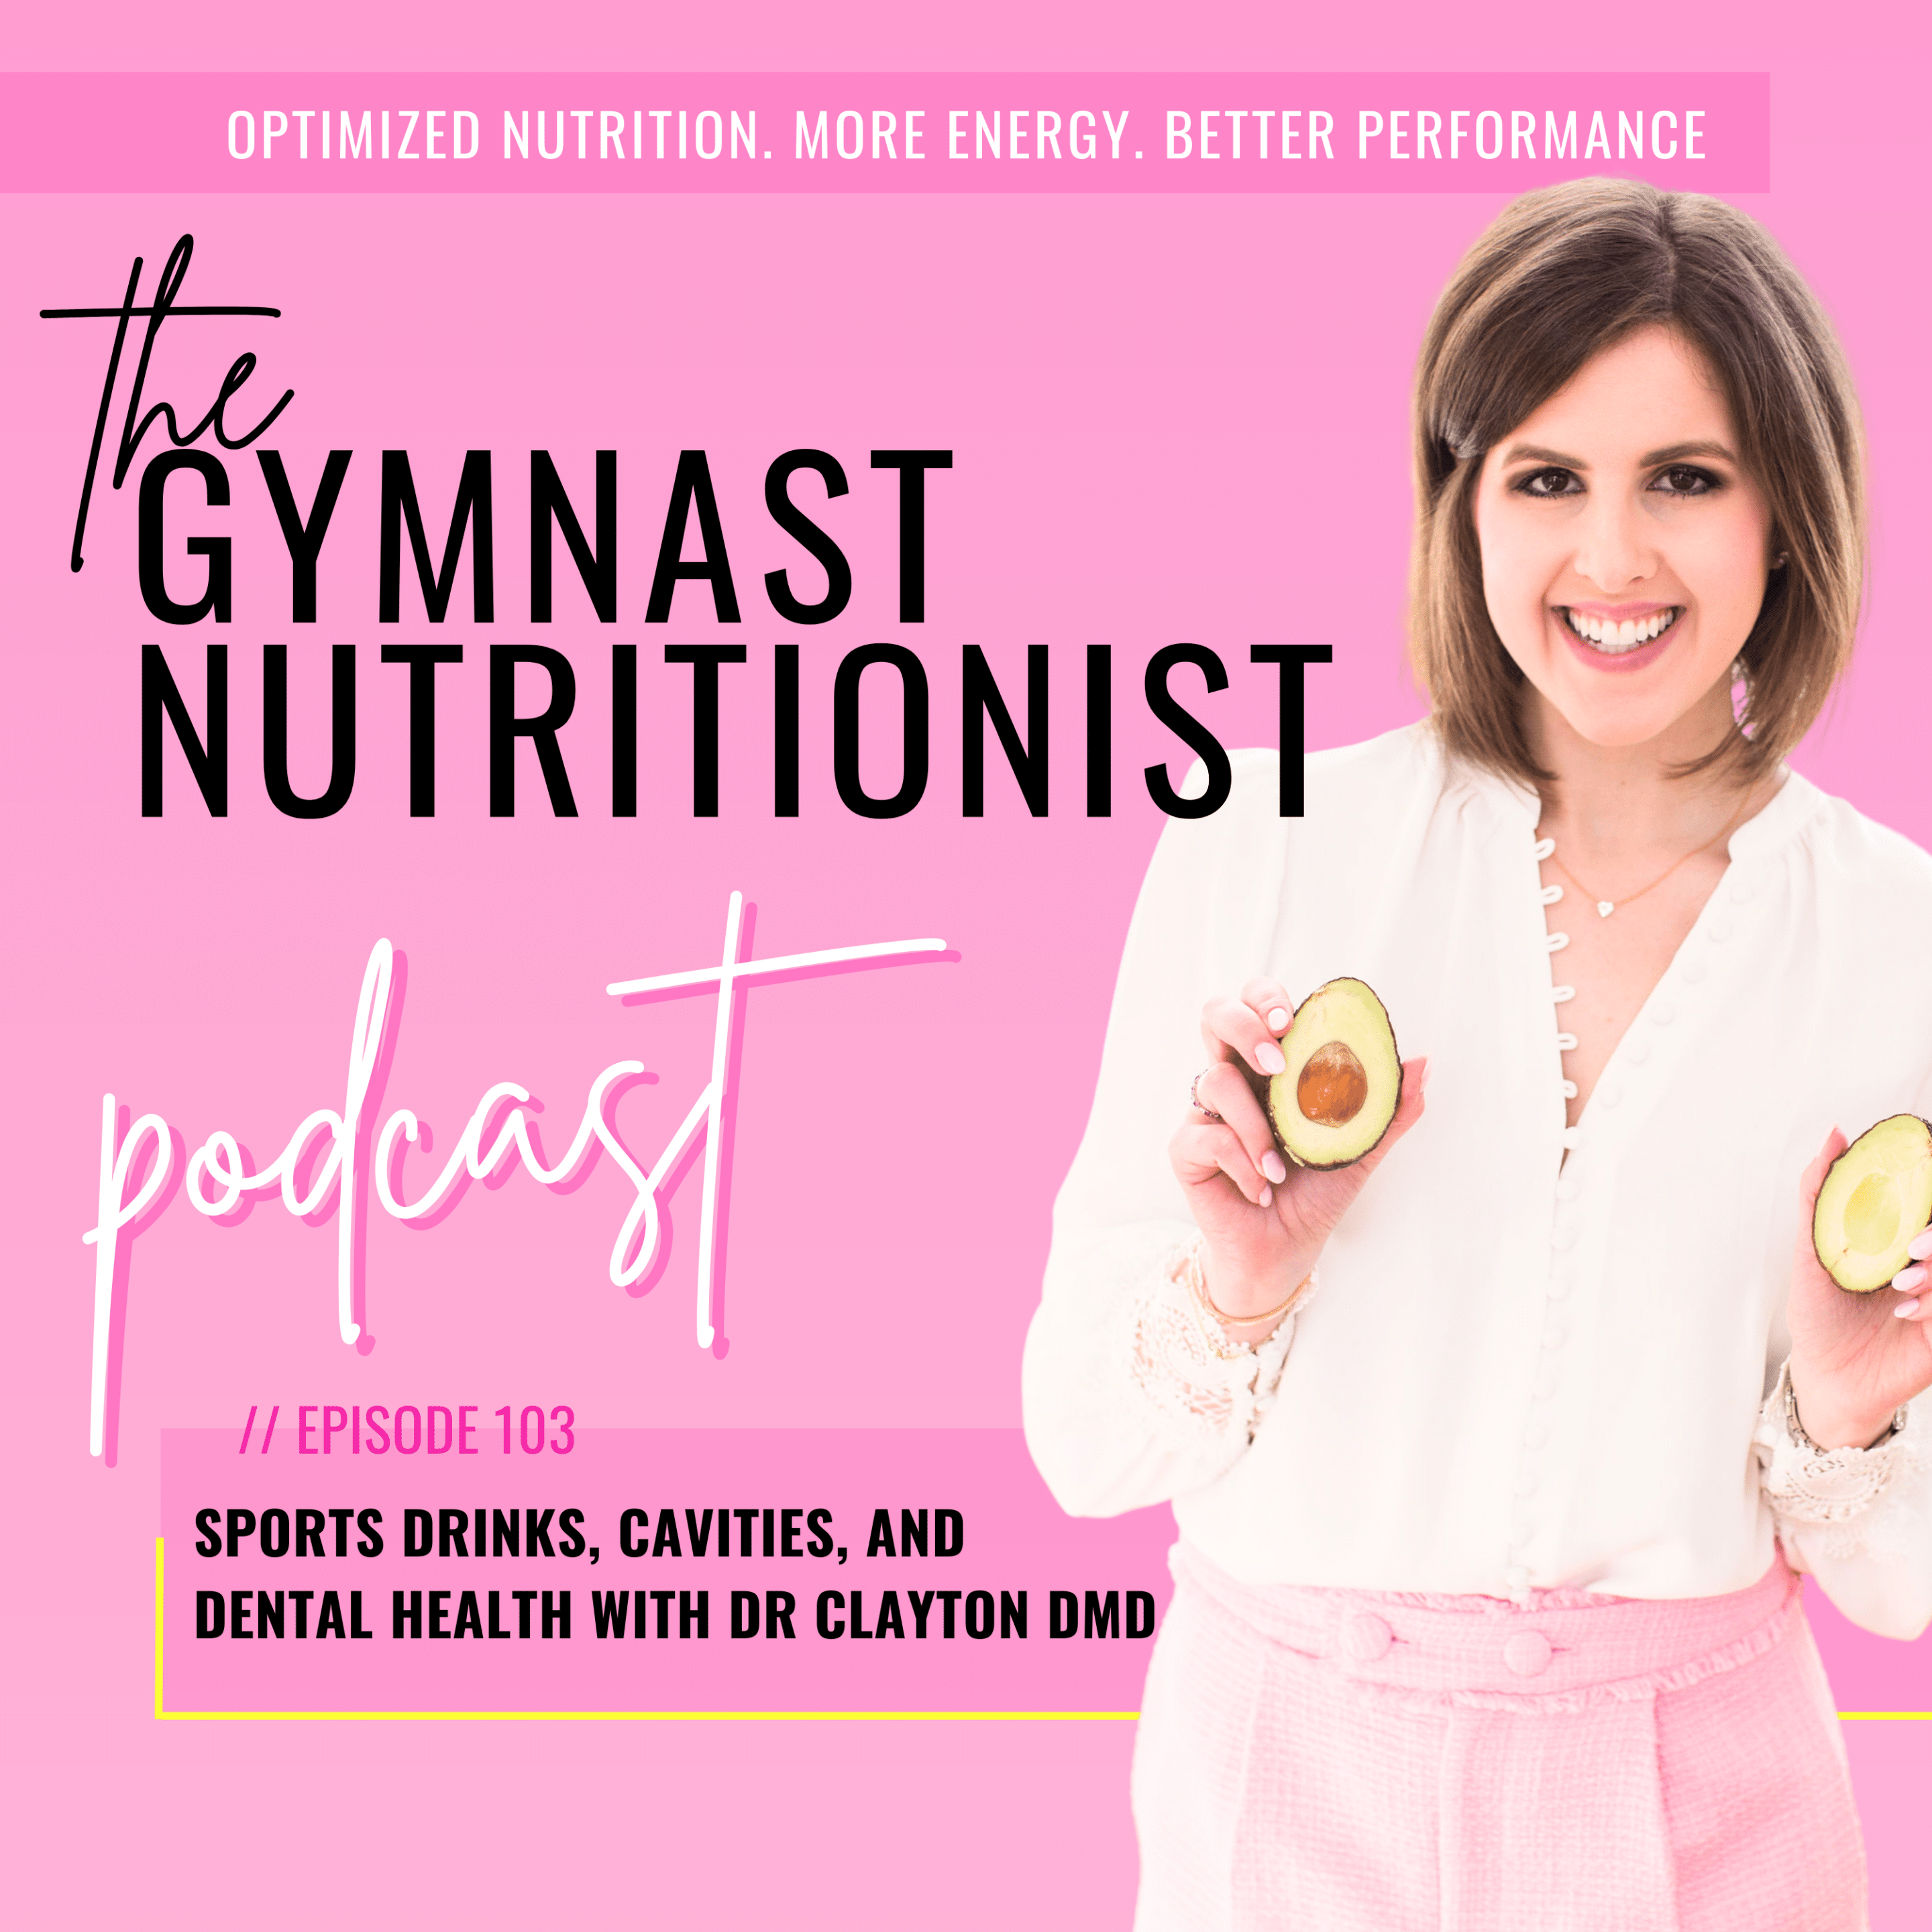 Episode 103 Sports Drinks, Cavities, and Dental Health with Dr Clayton DMD